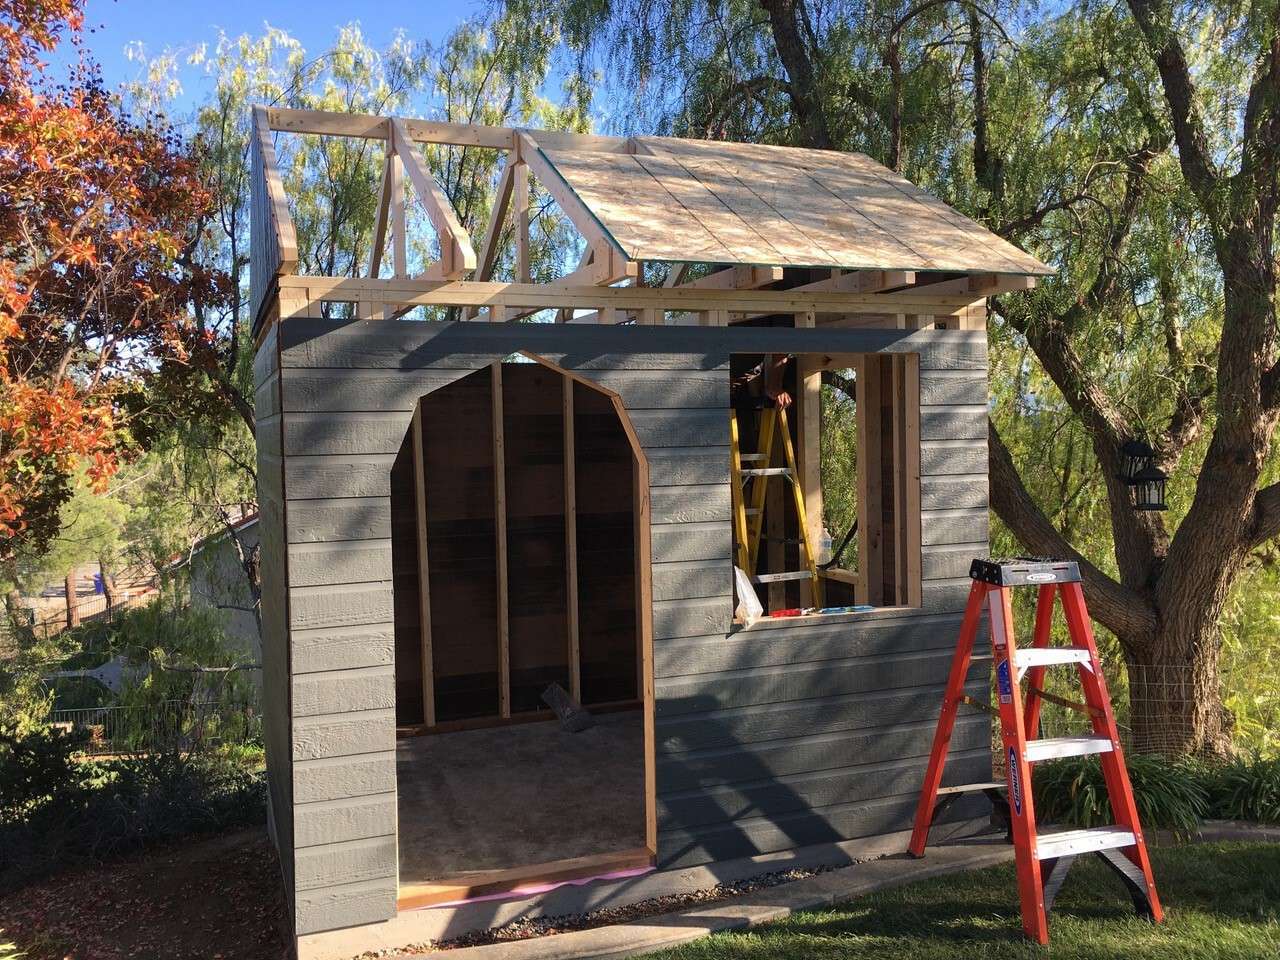 Front view of 7' x 9' Palmerston Garden Shed located in Castiac, California - Summerwood Products